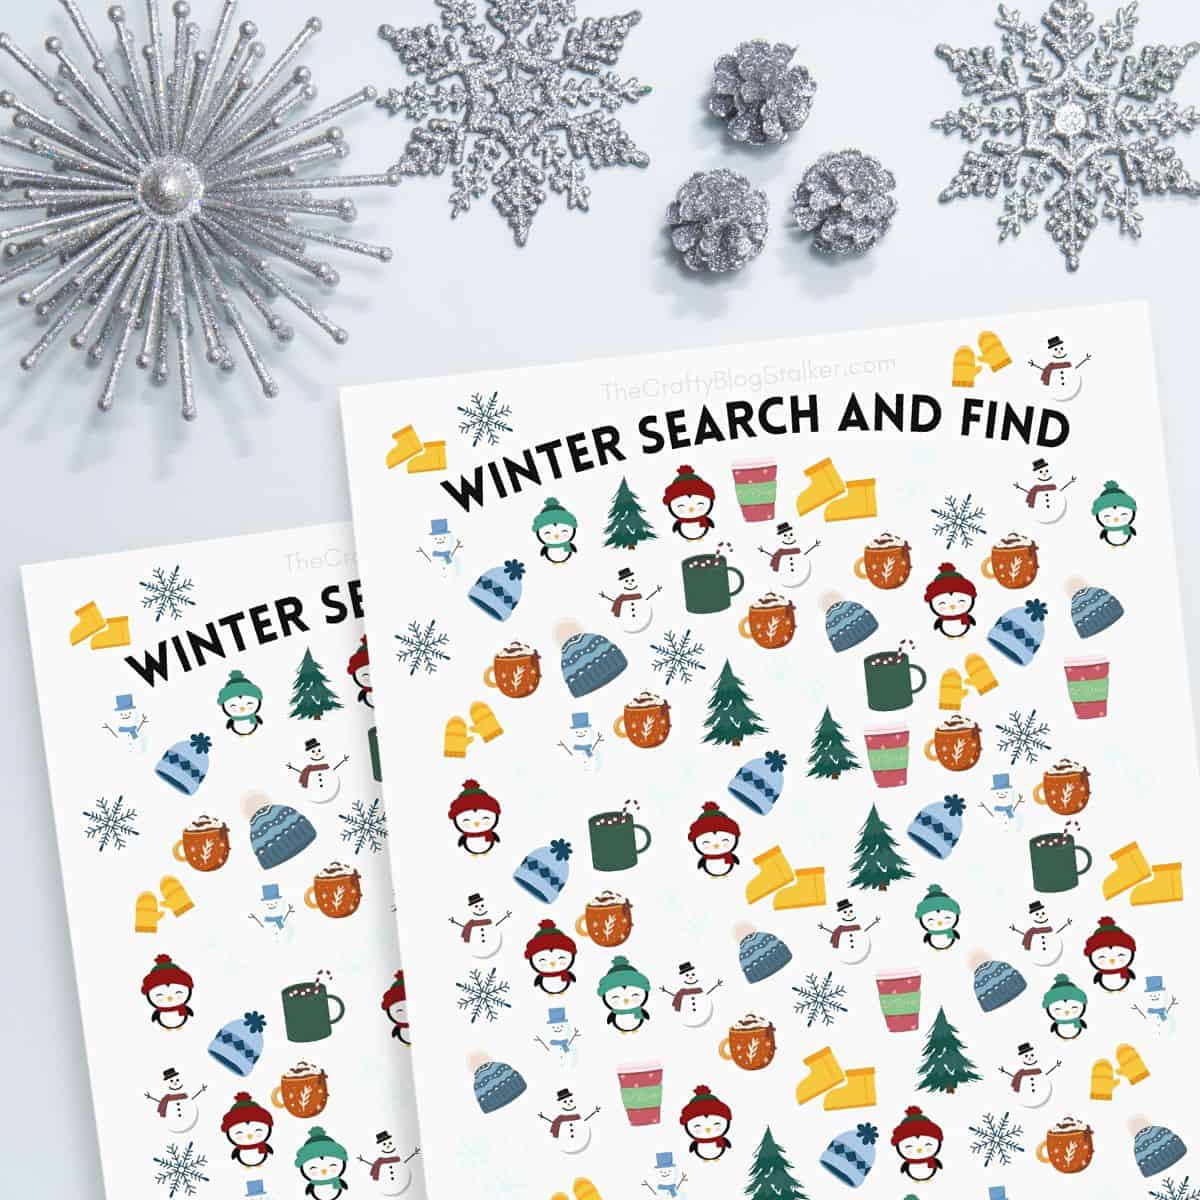 Winter Search and Find Printable for Ages 4-6 - Crafty Blog Stalker